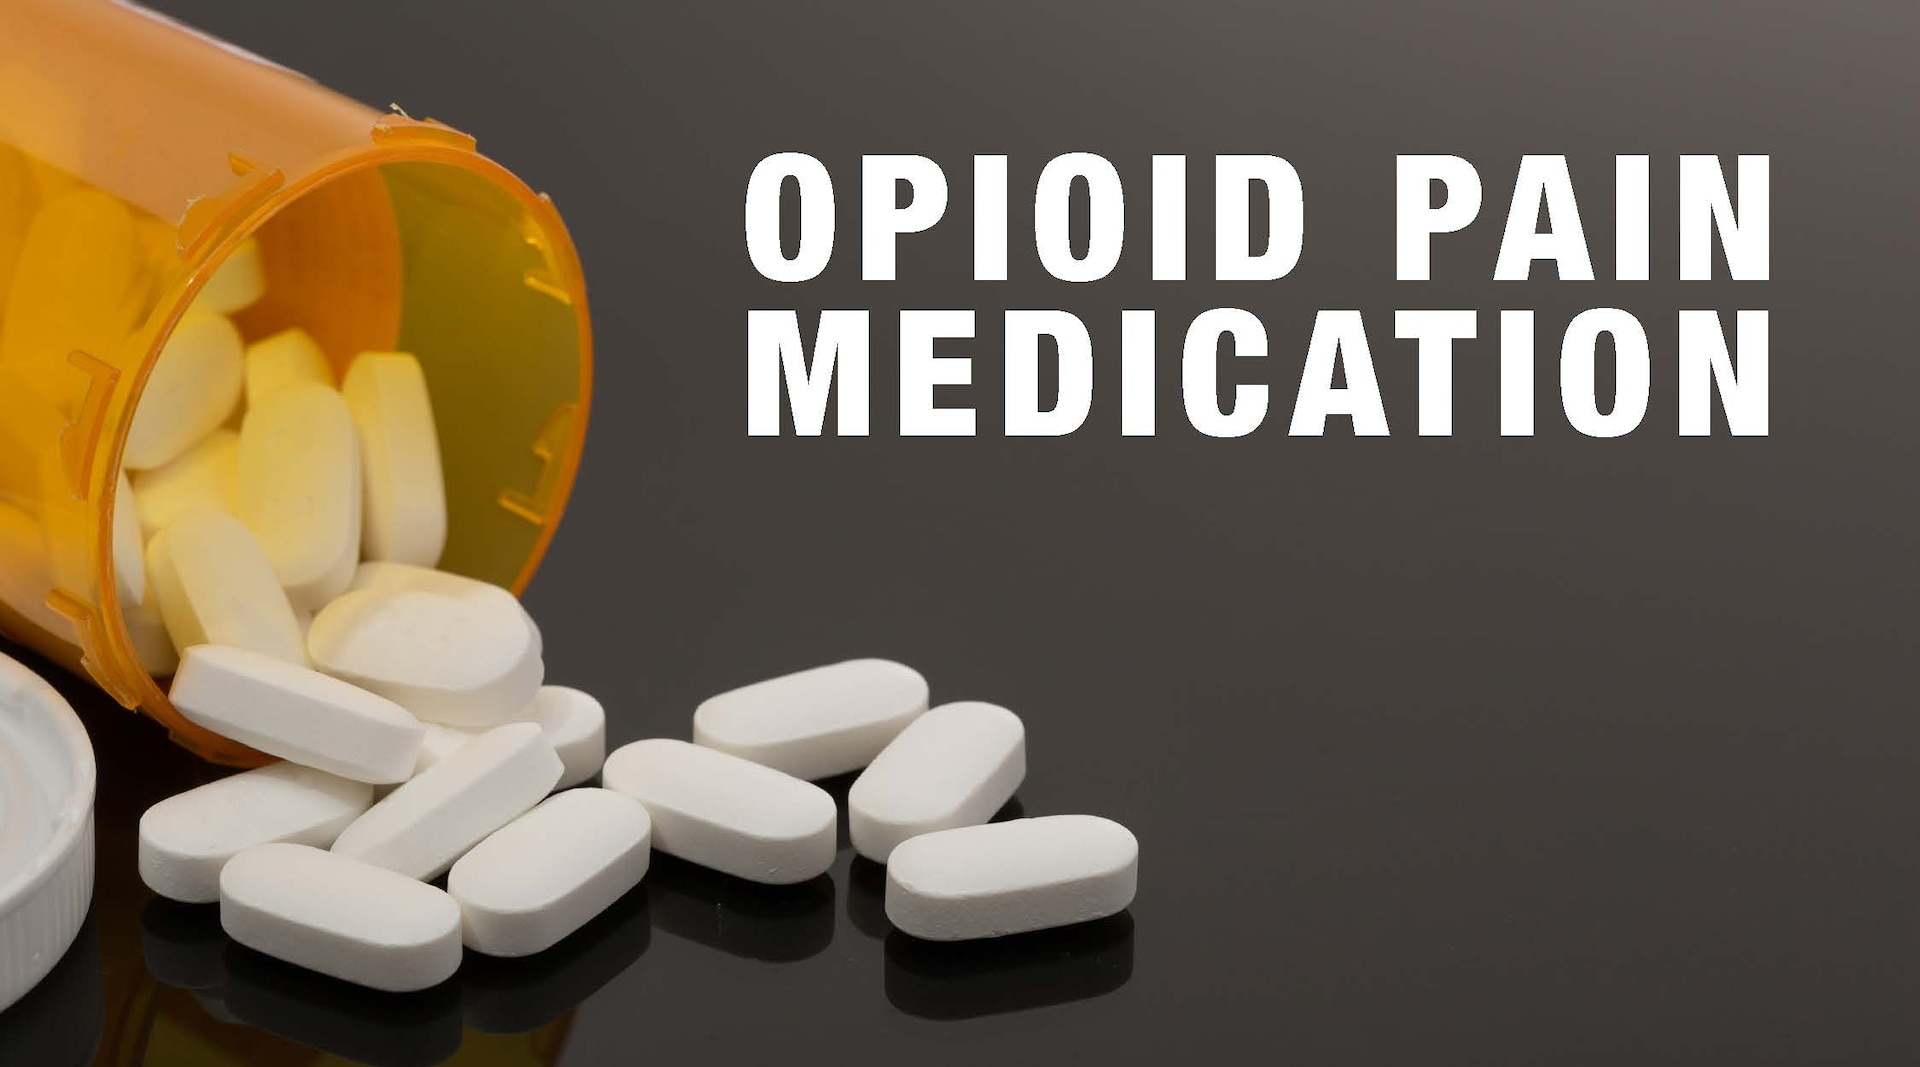 Pain medications can be dangerous opioids.